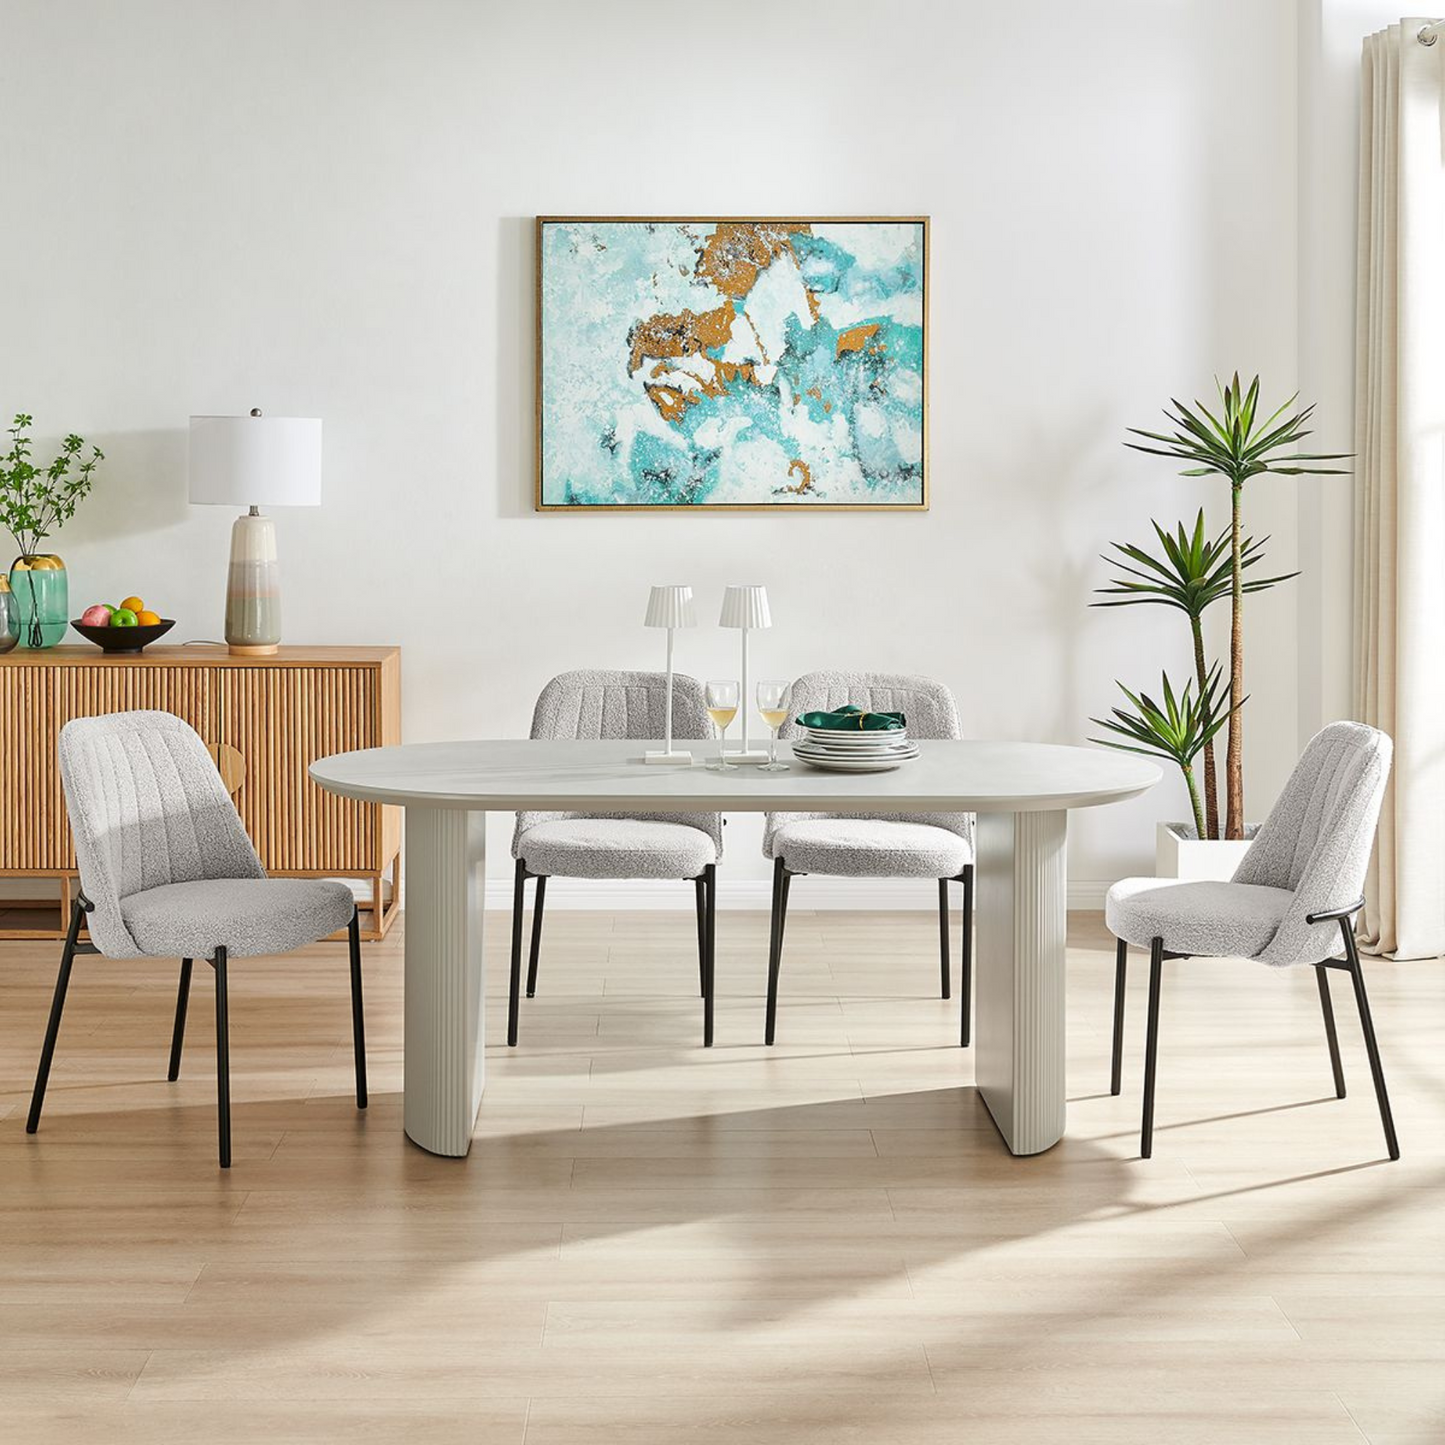 Light Grey Wooden Dining Table with Wooden Base